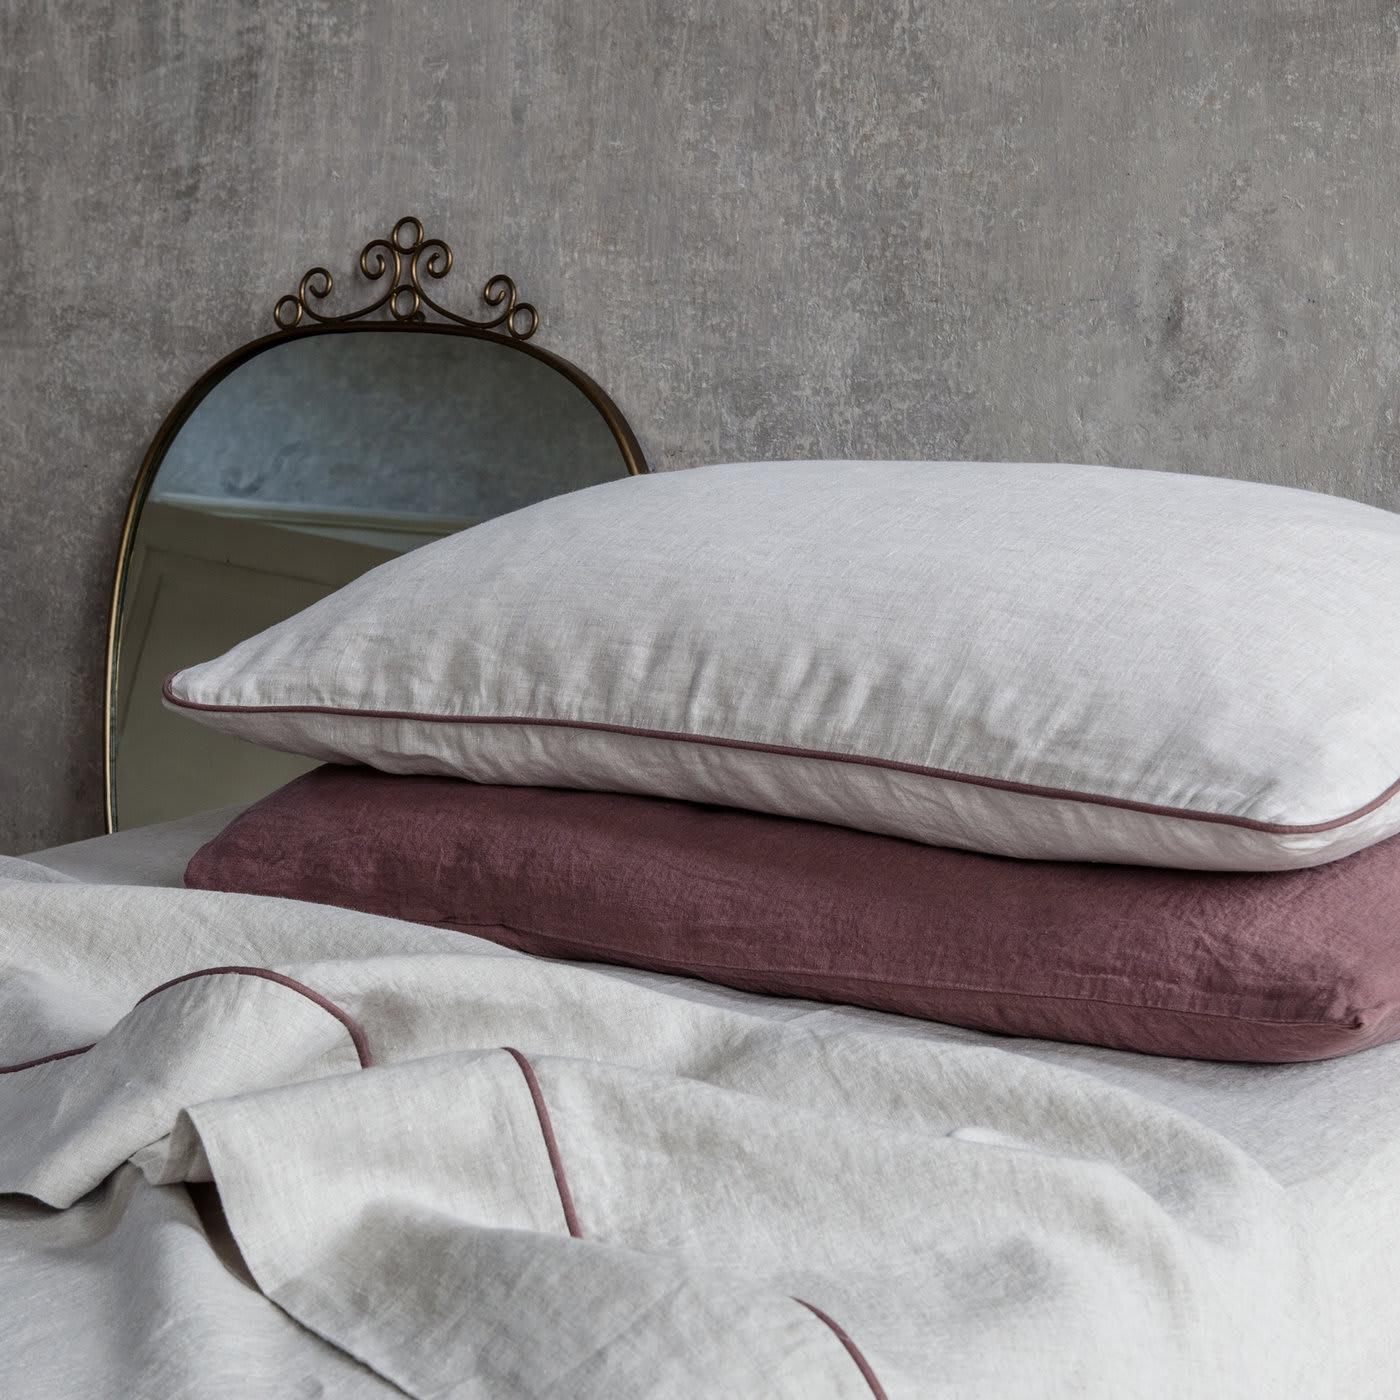 This superb set of linen comprises a flat sheet with Once Milano signature piping and matching pillowcases dyed in a timeless and delicate vintage pink, completed with a fitted sheet in a natural shade. The entire set, handcrafted of the finest